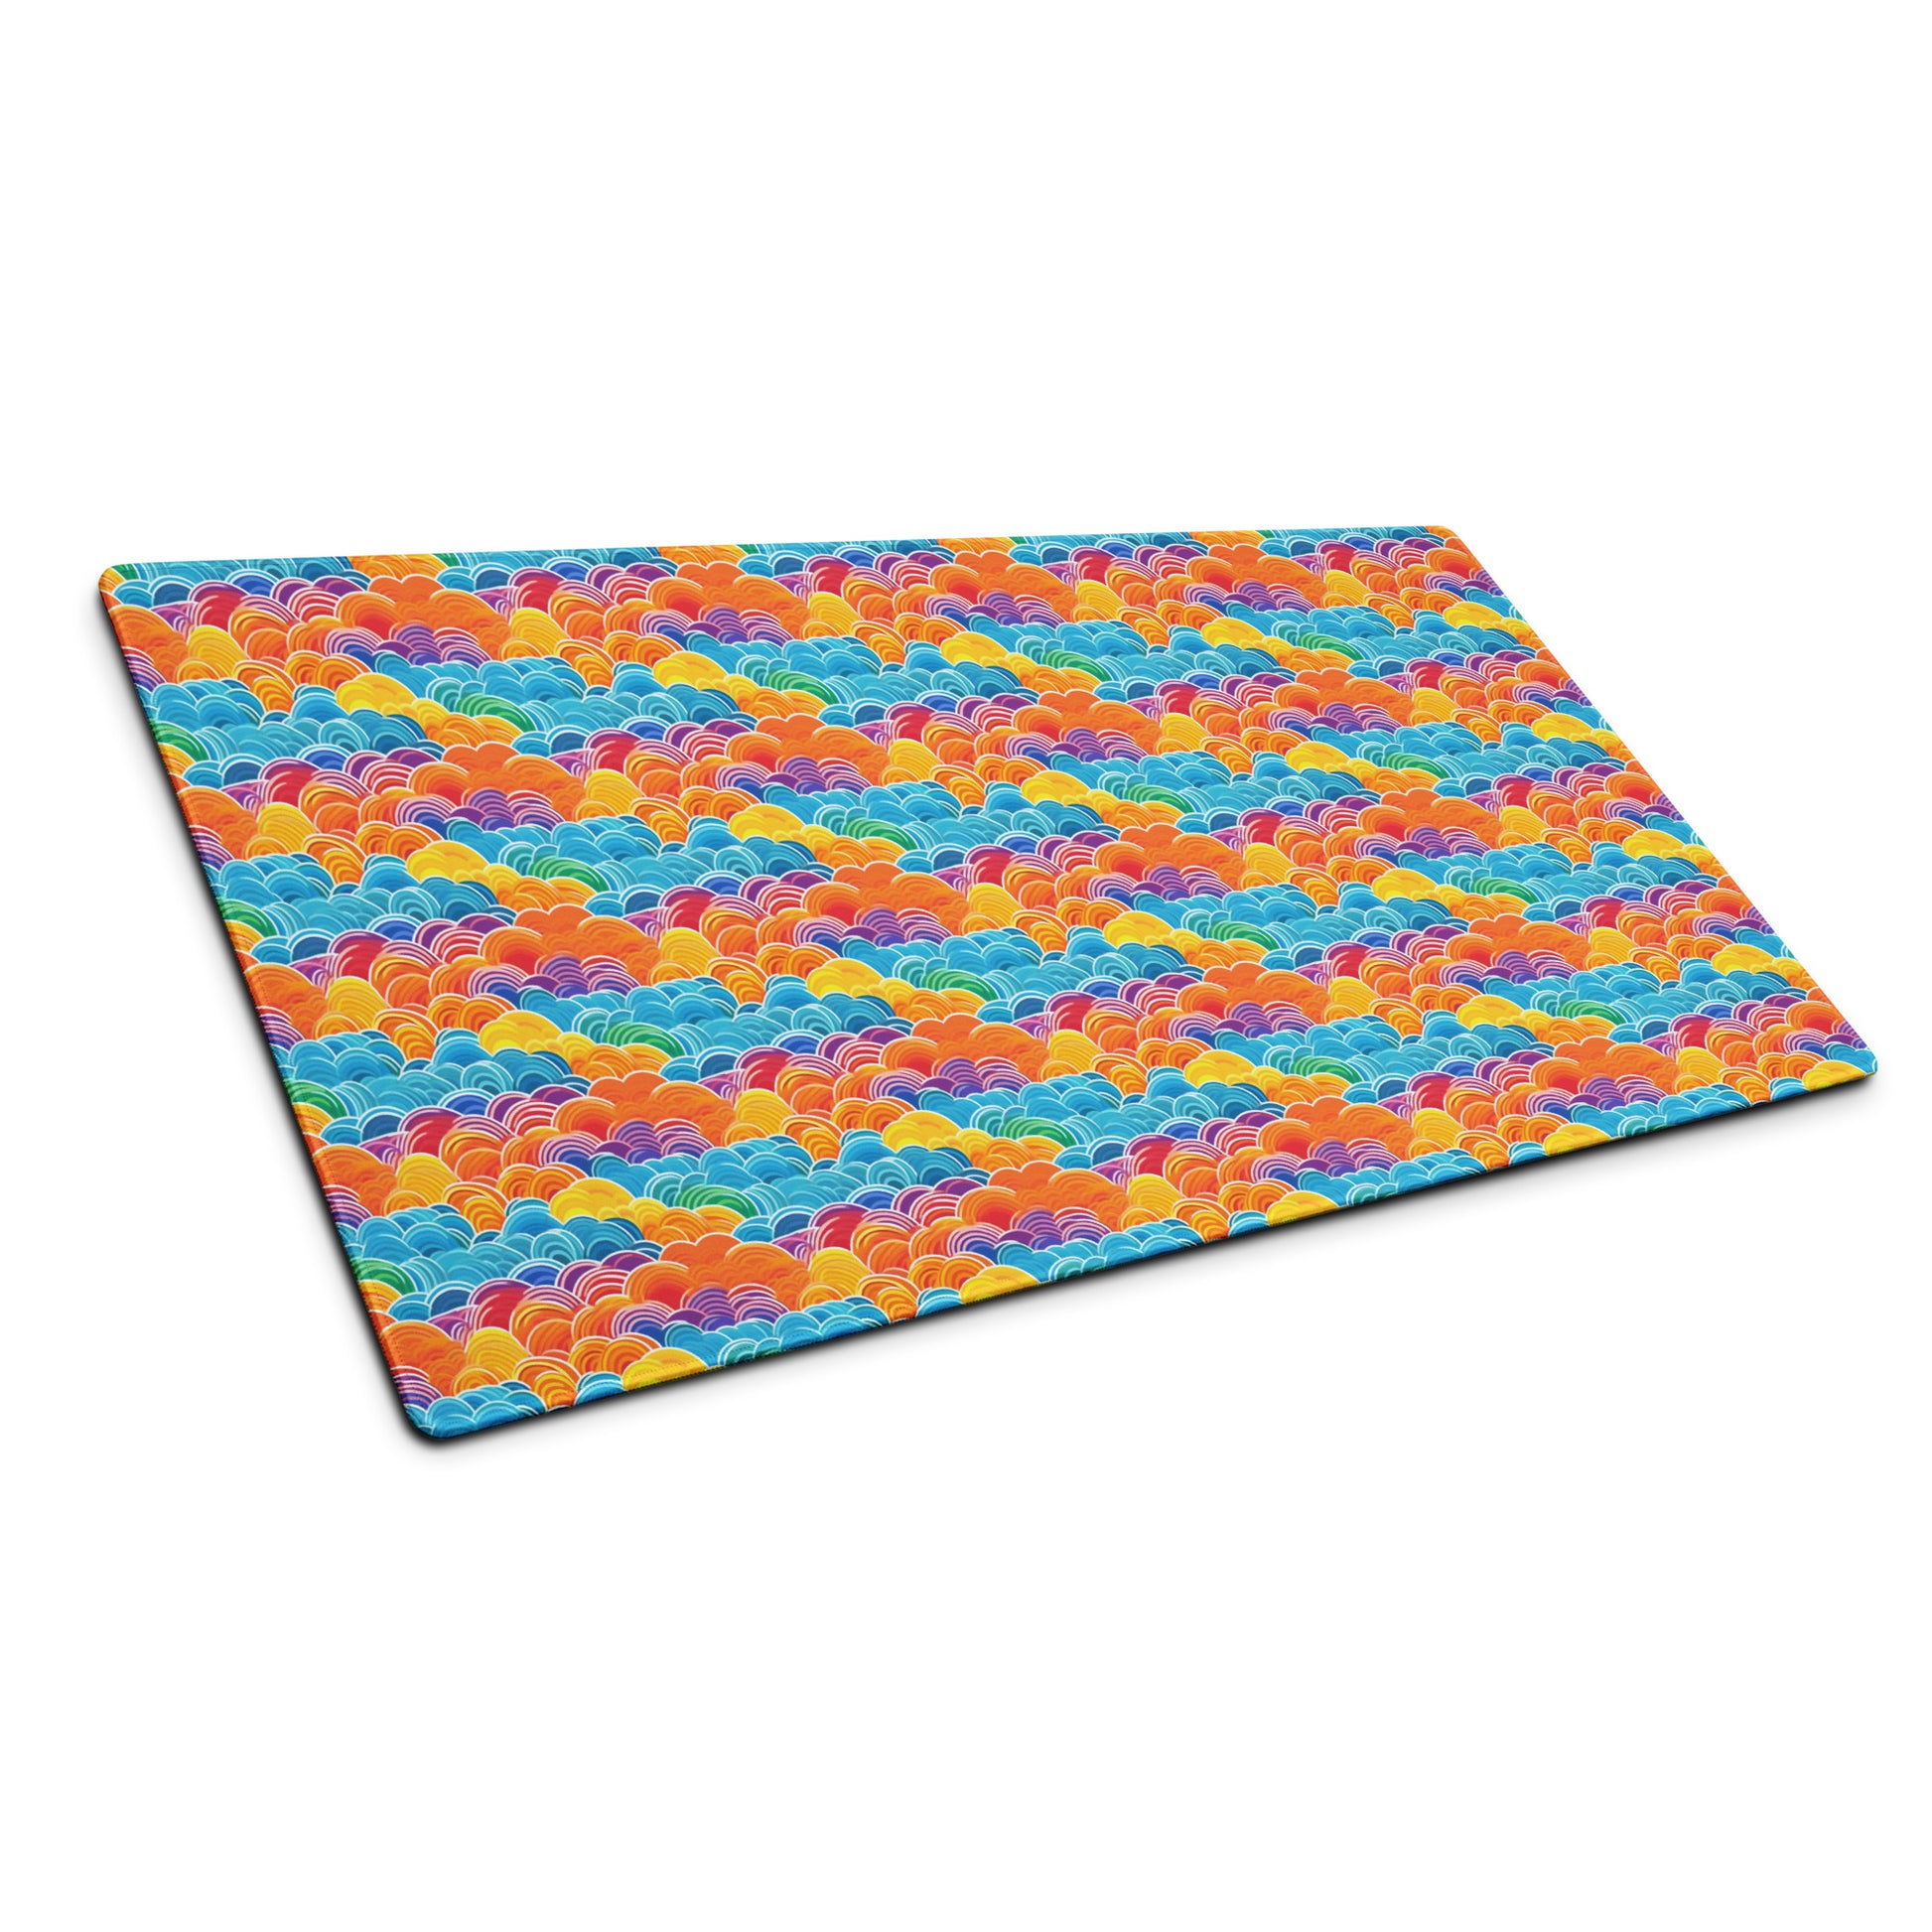 A 36" x 18" desk pad with bubbly swirly clouds all over it shown at an angle. Rainbow colored.